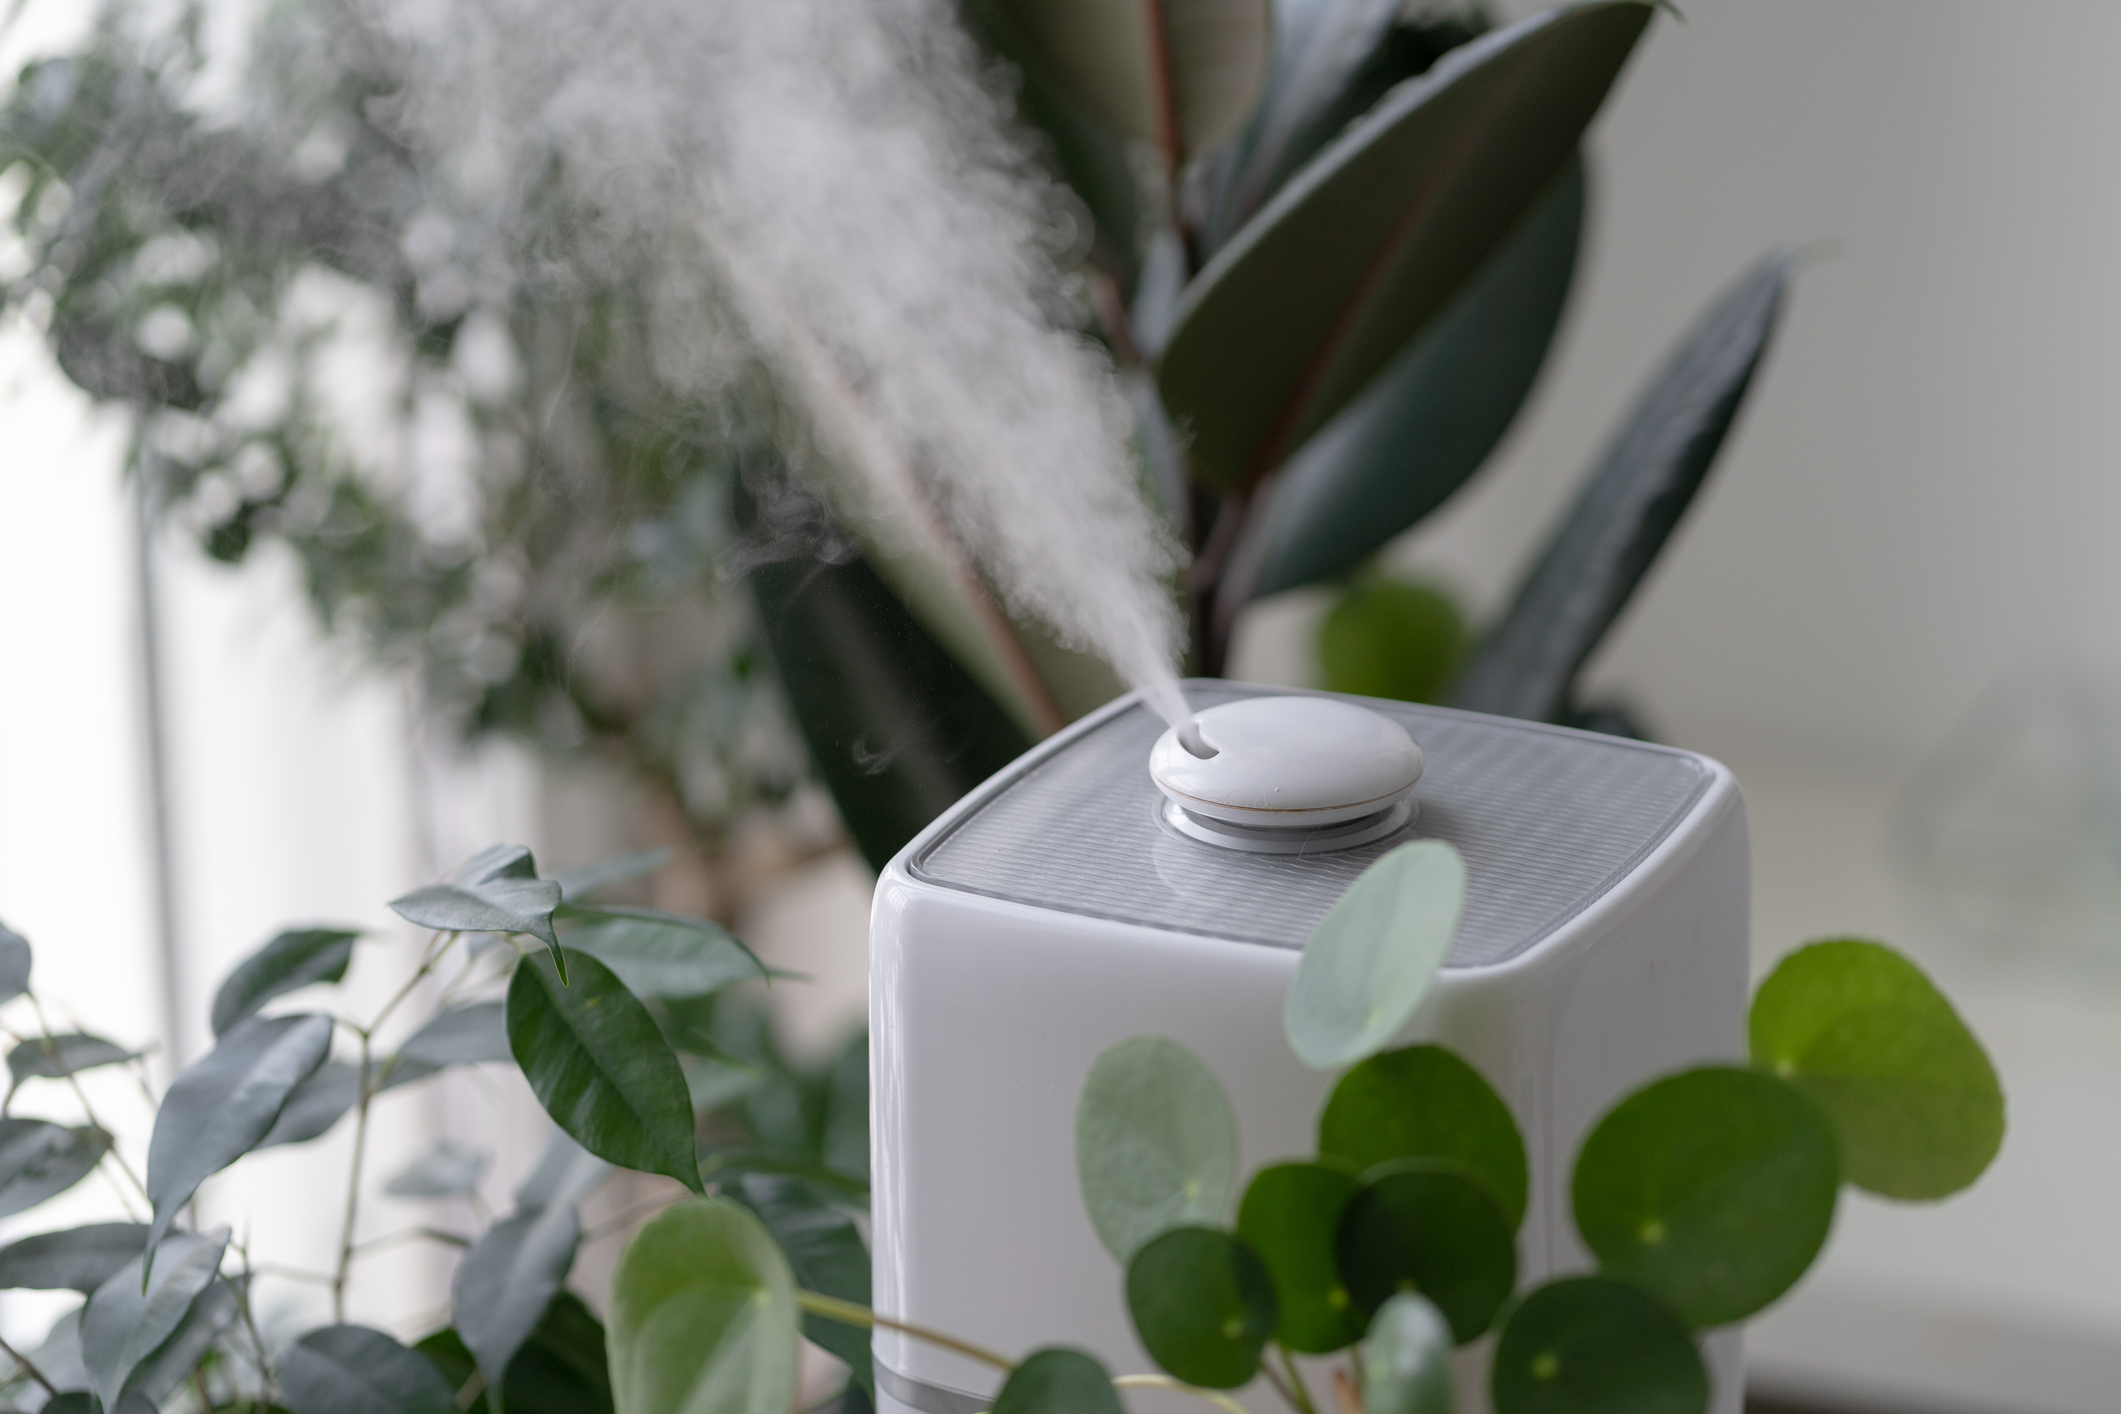 Steam from humidifier moistens dry air surrounded by indoor houseplants home garden plant care